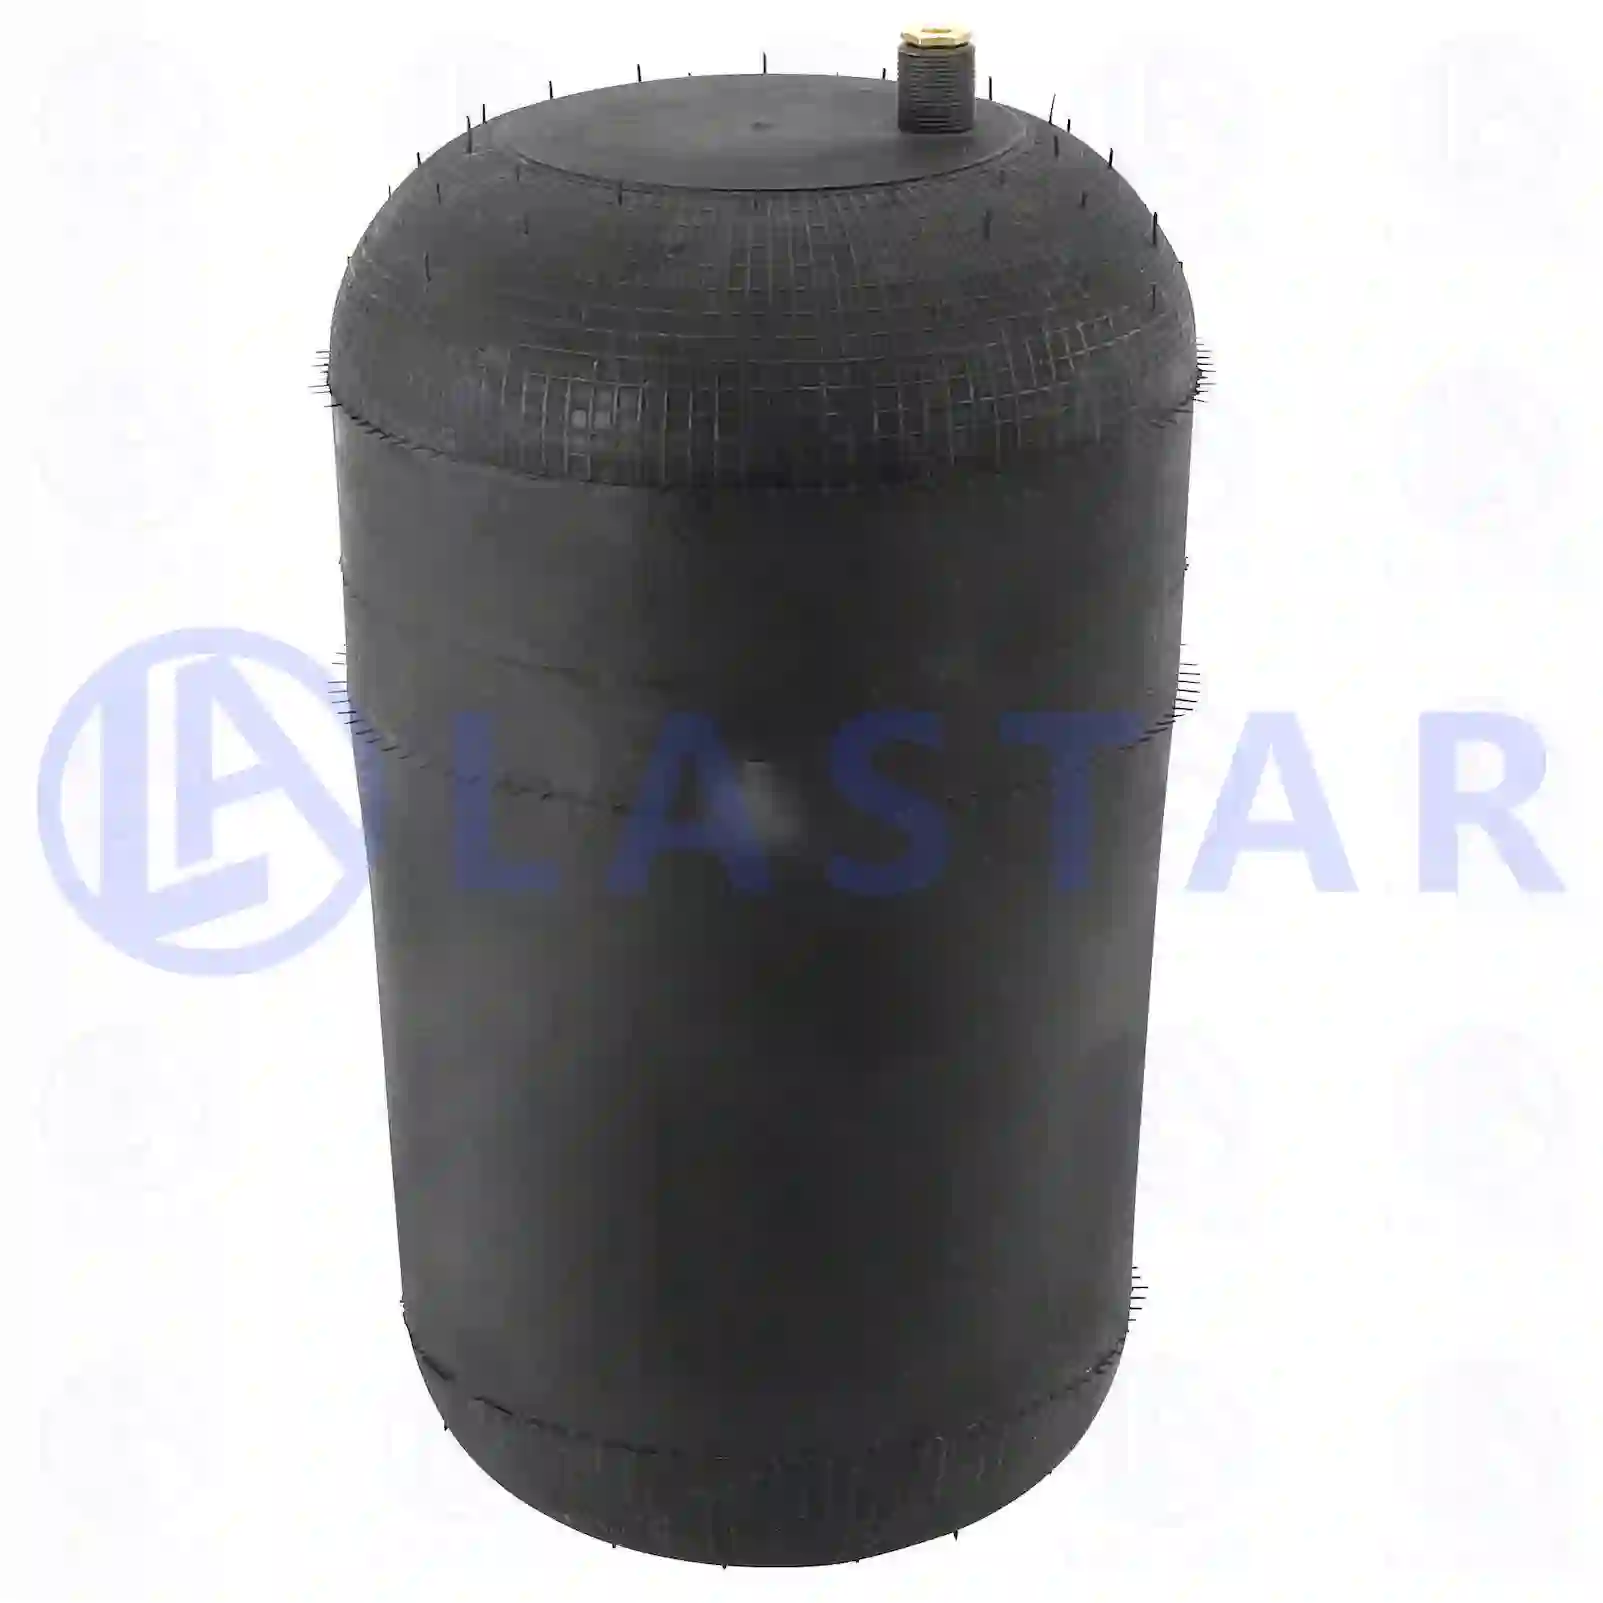 Air spring, without piston, 77728220, 9743280001, 9743280101, , , ||  77728220 Lastar Spare Part | Truck Spare Parts, Auotomotive Spare Parts Air spring, without piston, 77728220, 9743280001, 9743280101, , , ||  77728220 Lastar Spare Part | Truck Spare Parts, Auotomotive Spare Parts